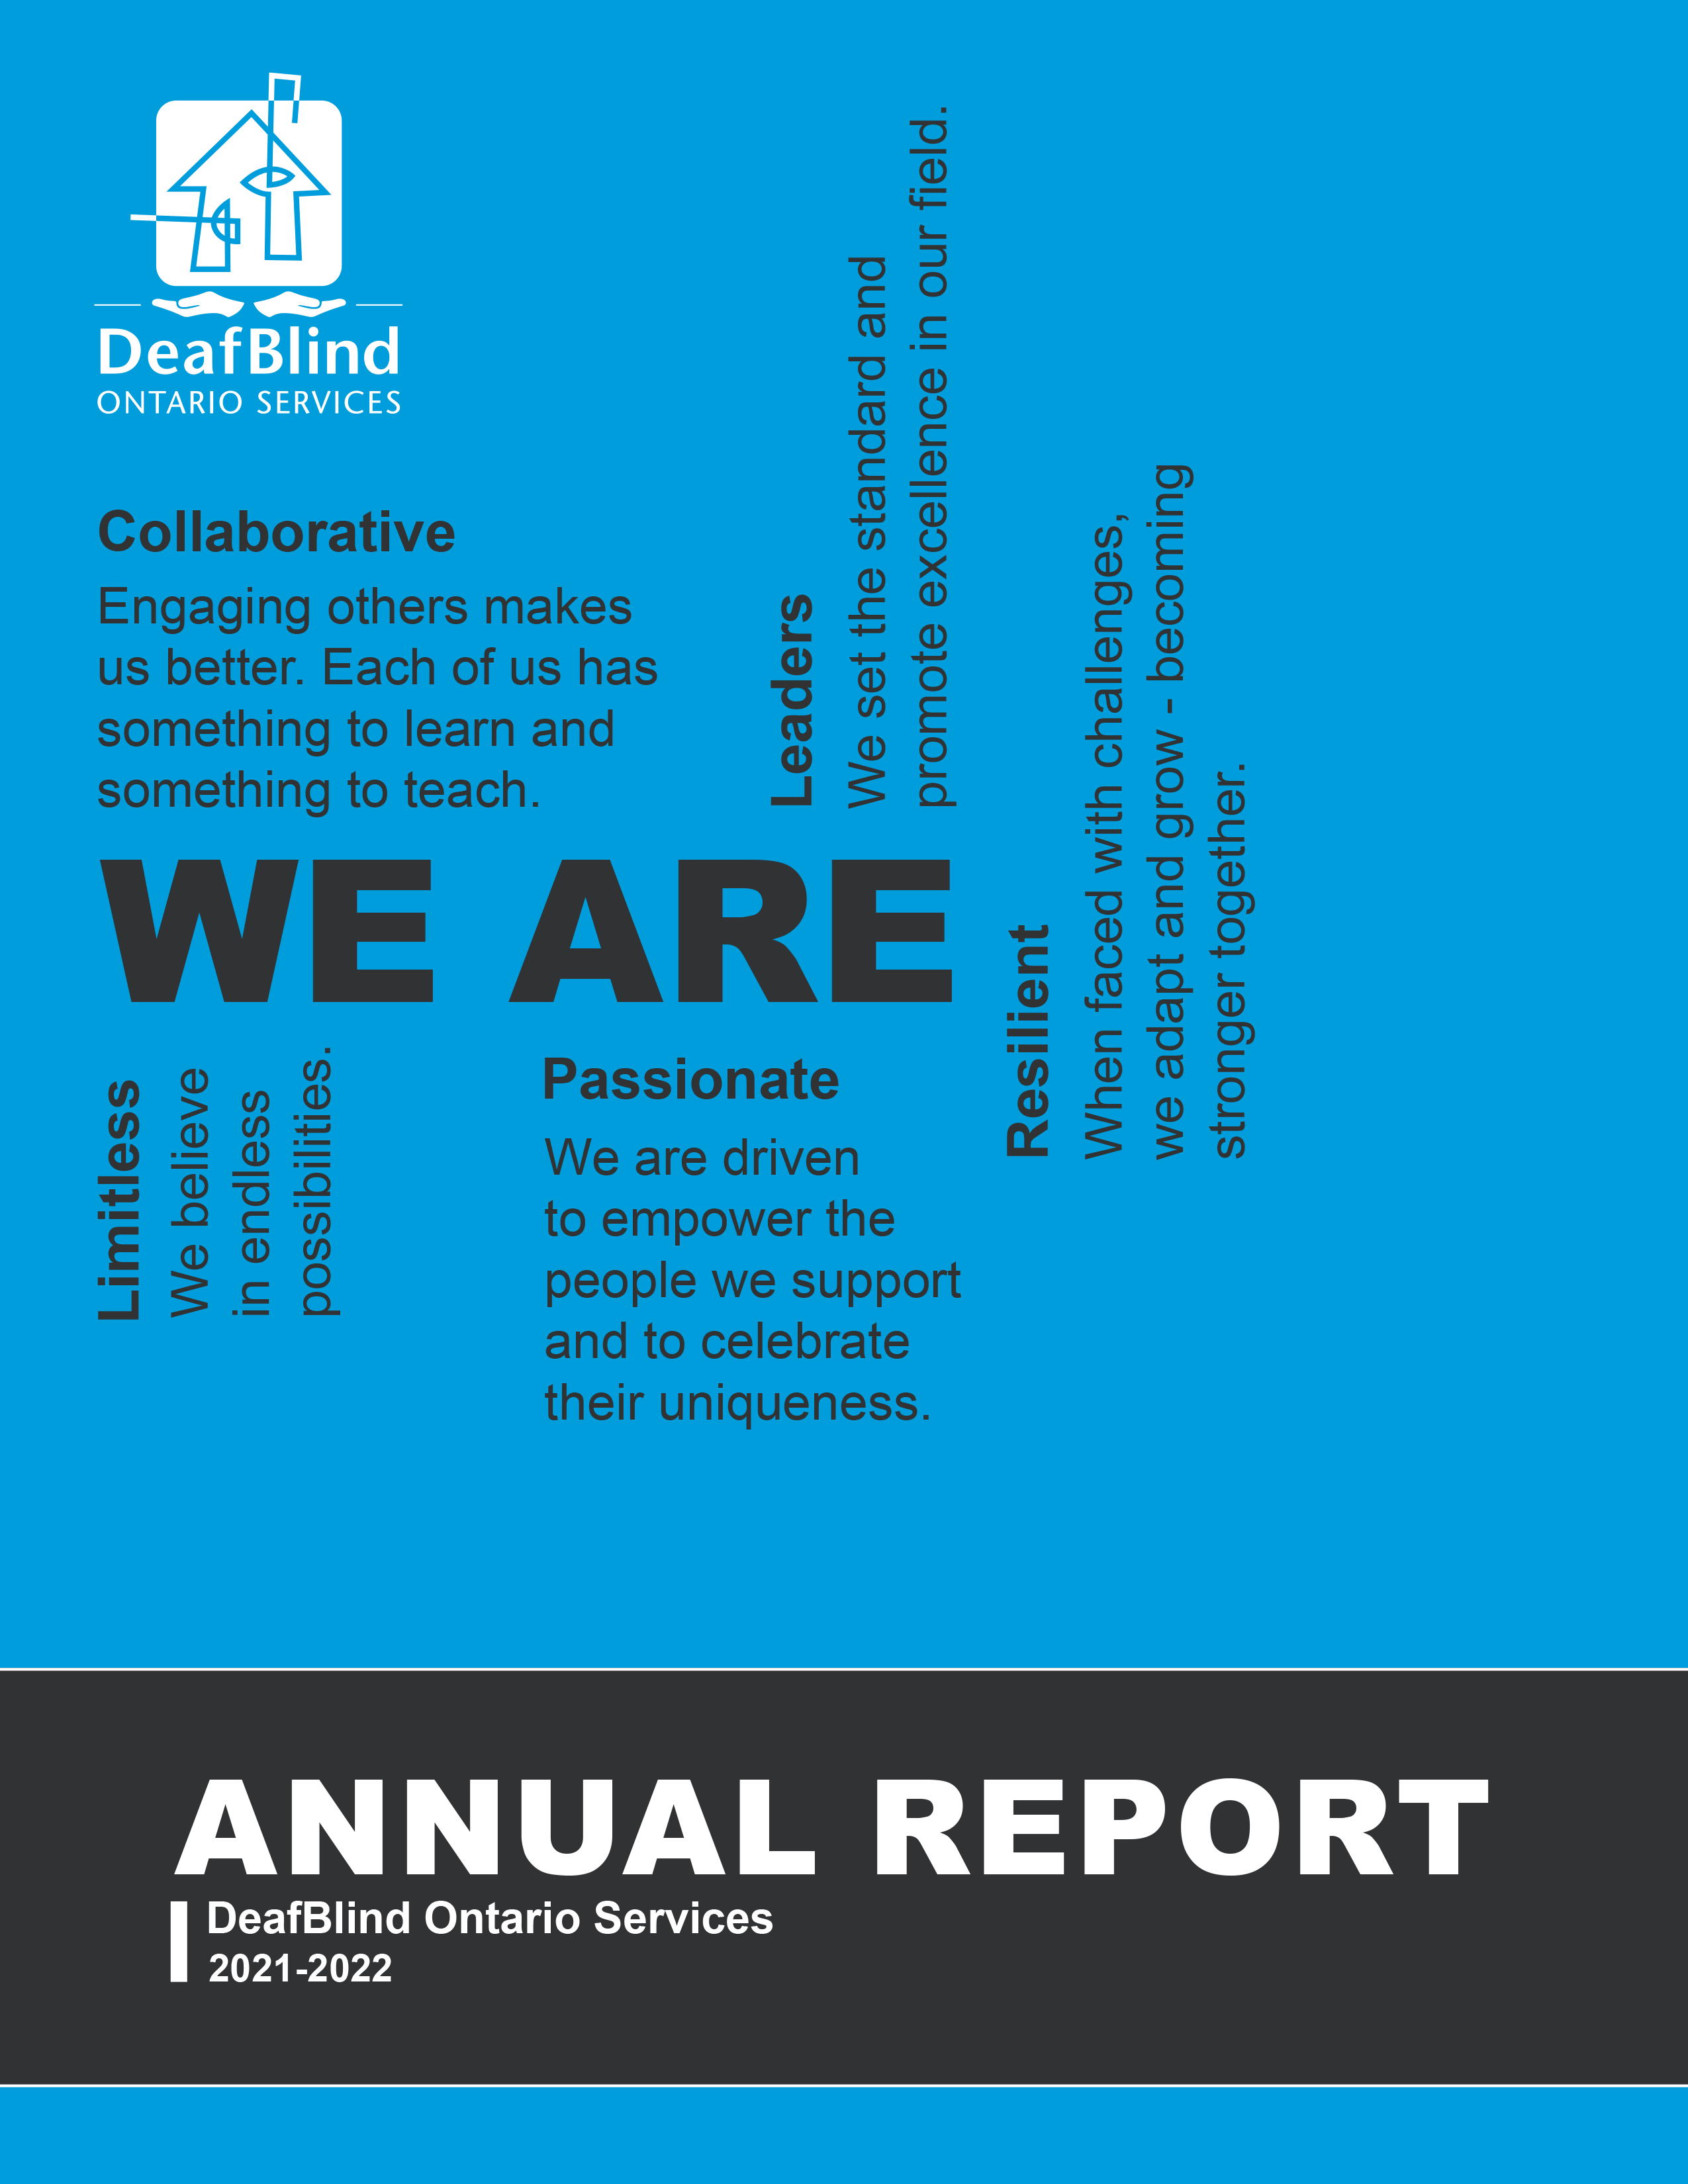 DeafBlind Ontario Services Annual Report Cover